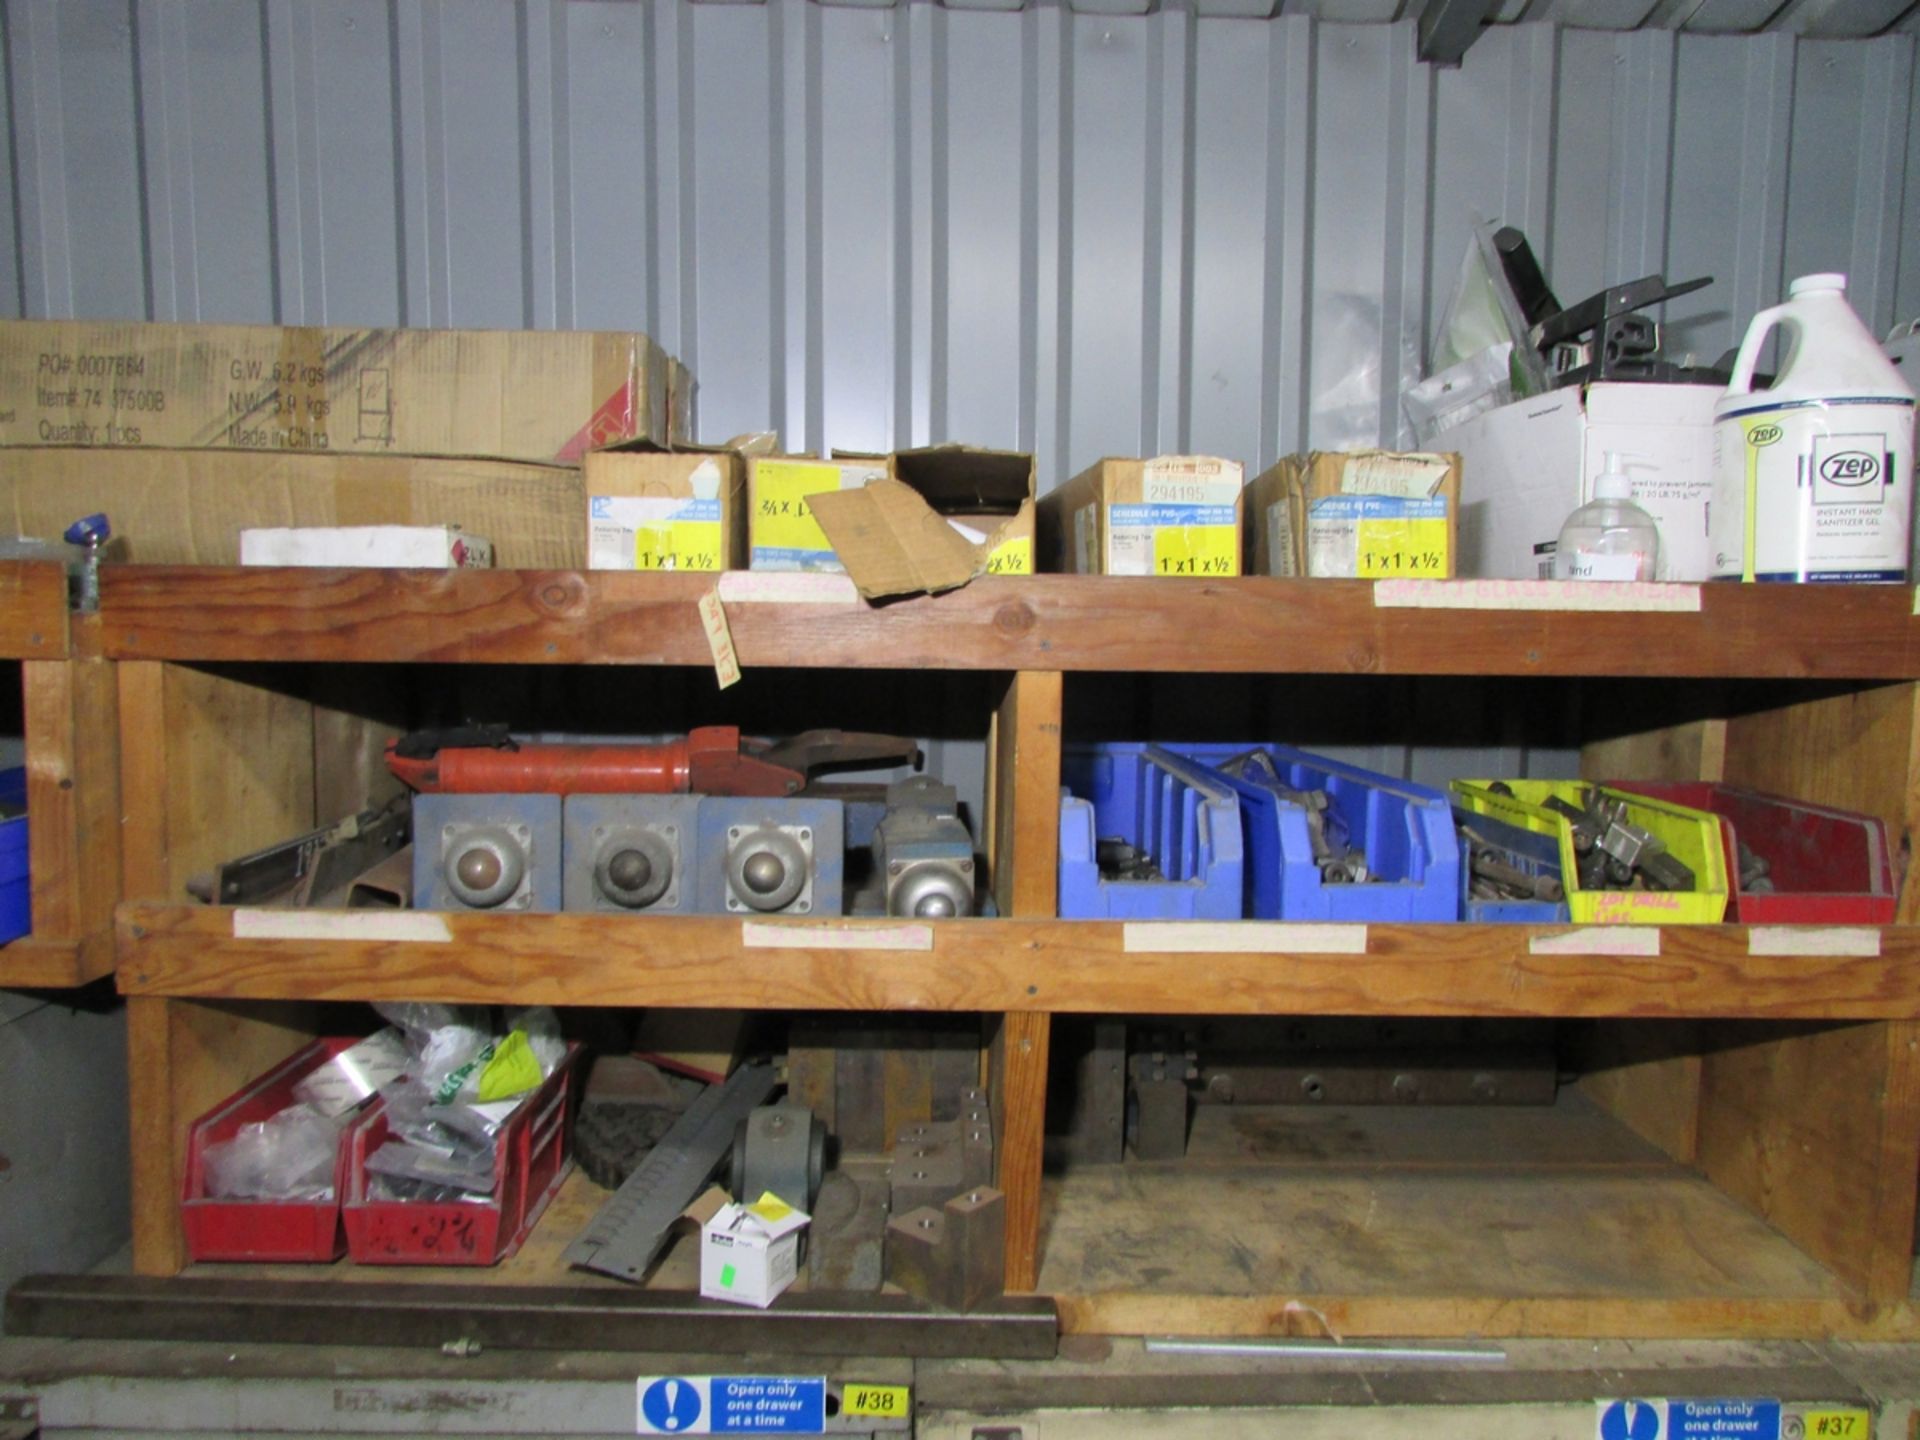 LOT - (10) SHELVING UNITS, W/ MISC. CONTENTS: LARGE ASSORTMENT OF HARDWARE, NUTS, BOLTS, FITTINGS, - Image 9 of 17